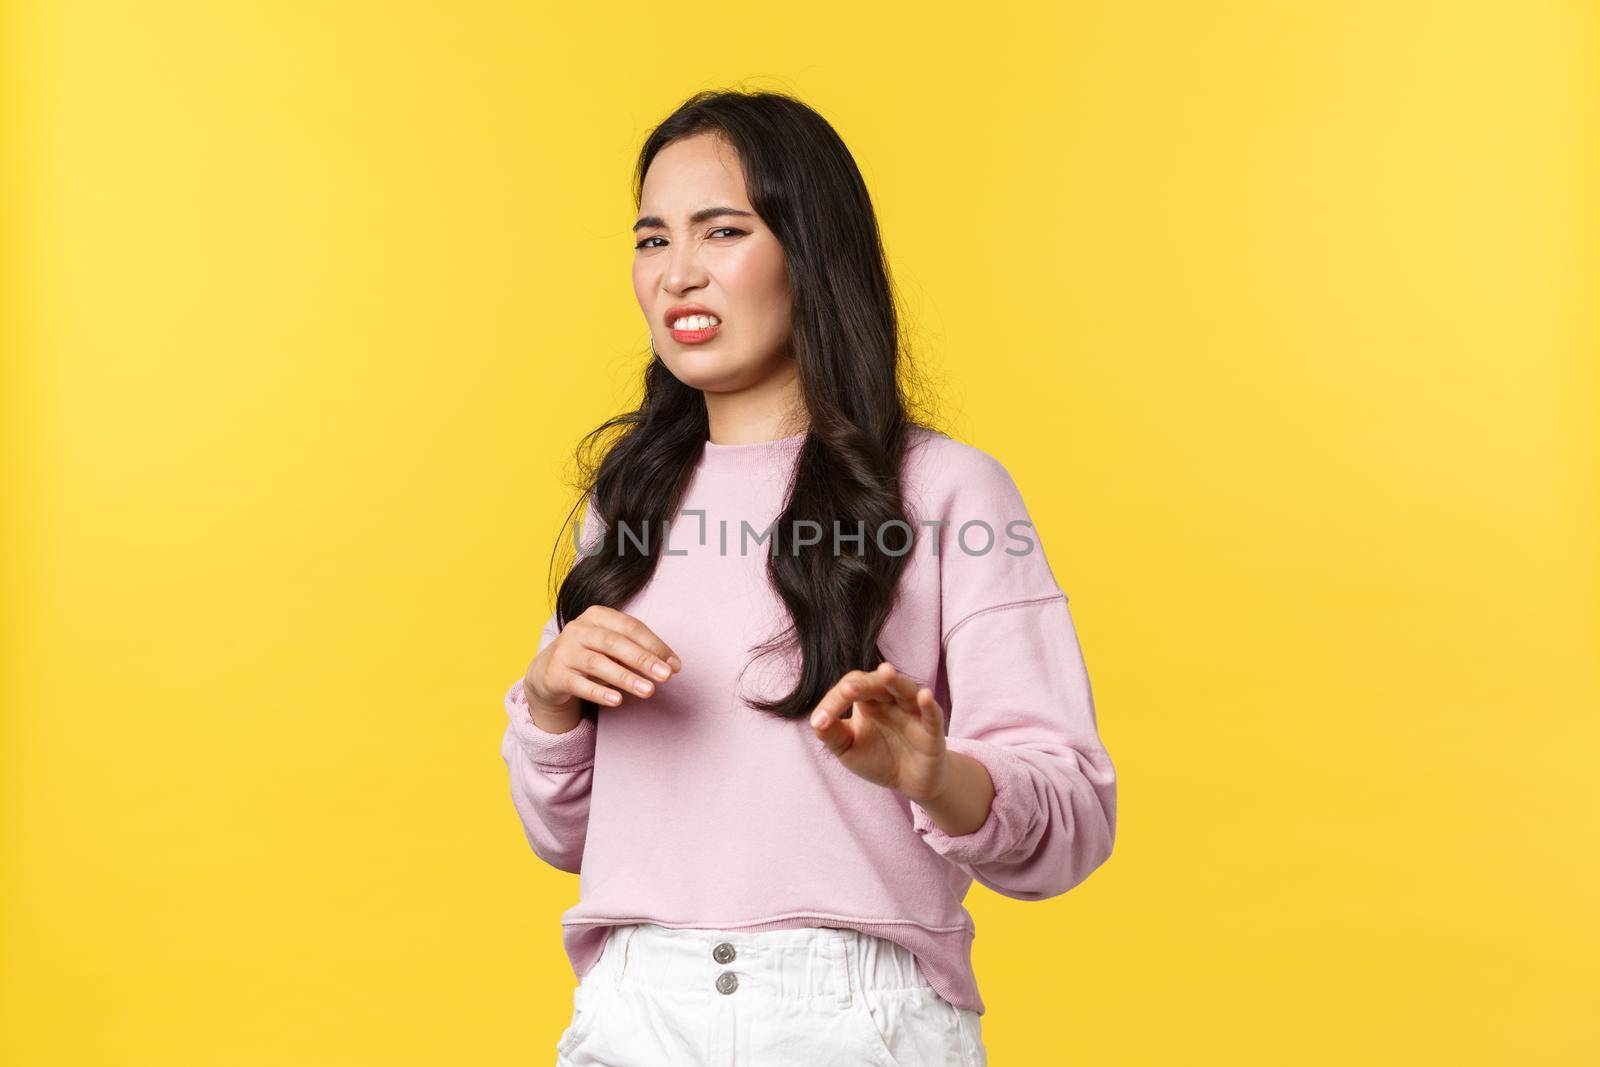 People emotions, lifestyle and fashion concept. Gross stay away from me. Disgusted picky and arrogant asian woman gesturing and step back with aversion, rejecting offer, refusing, yellow background.